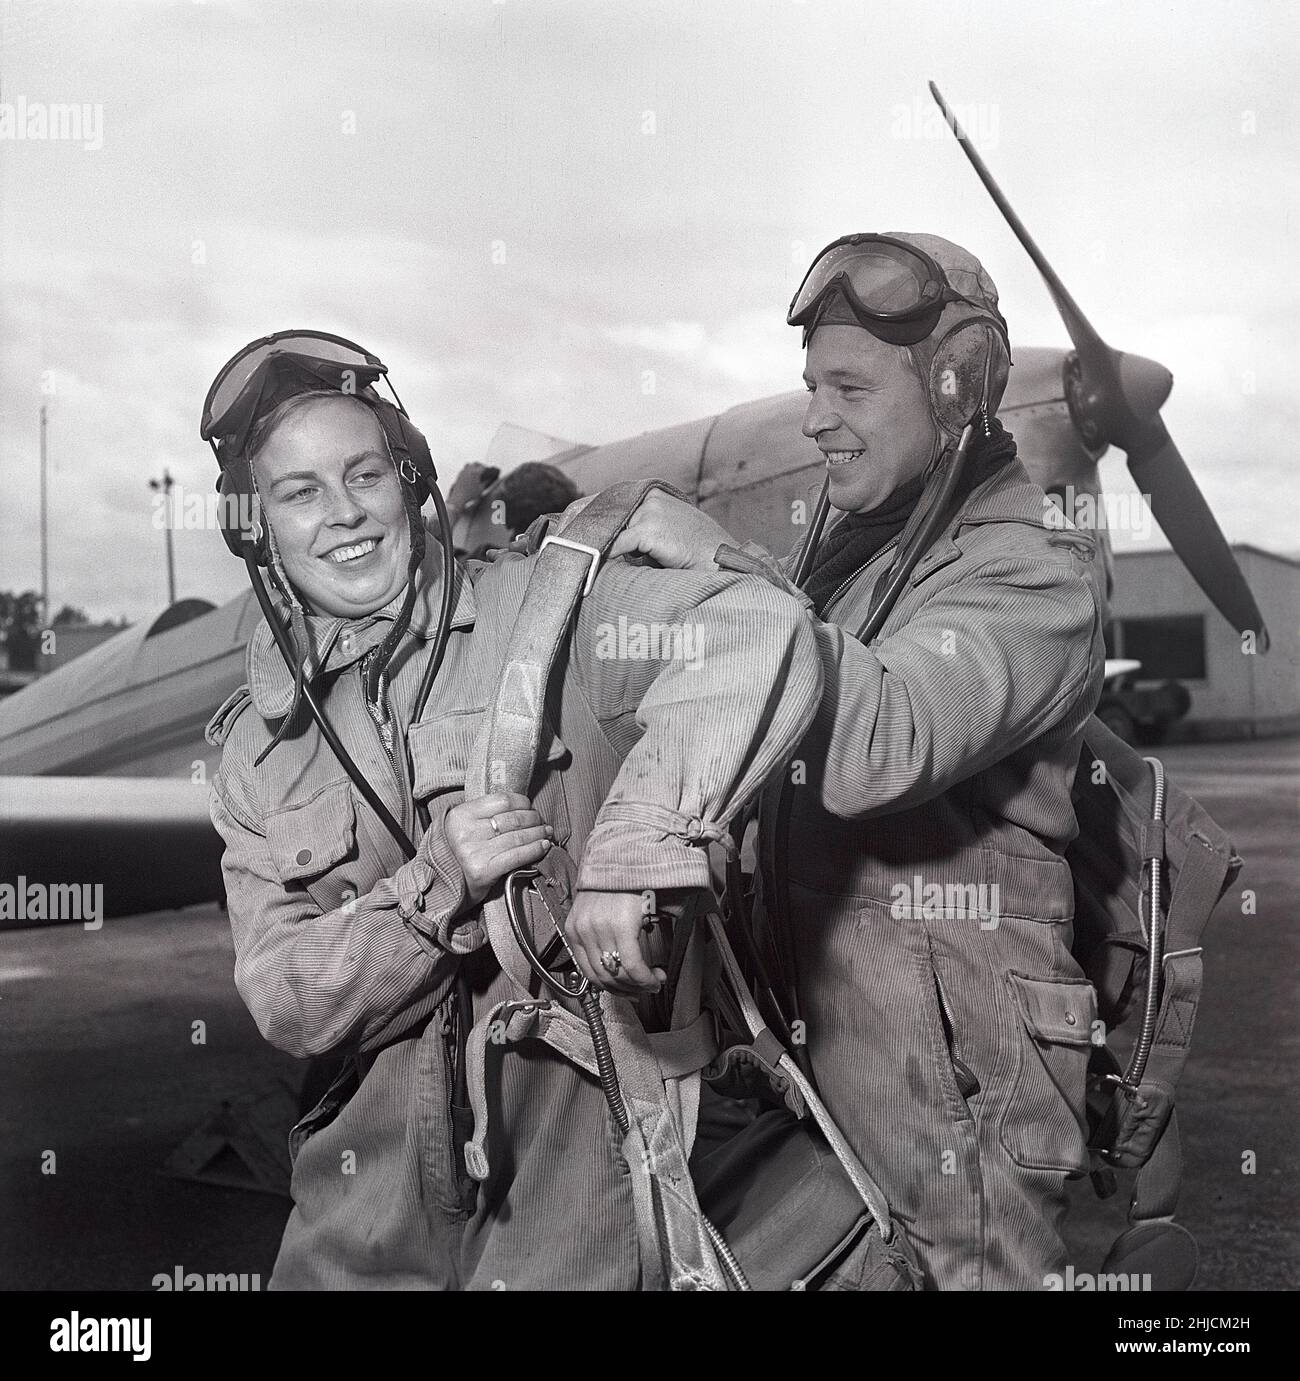 Pilot in the 1950s. Swedish Birgit Thuring 1912-1984. She is helped to put on here parachute before making the flight. Sweden 1950s Kristoffersson ref AT8-6 Stock Photo